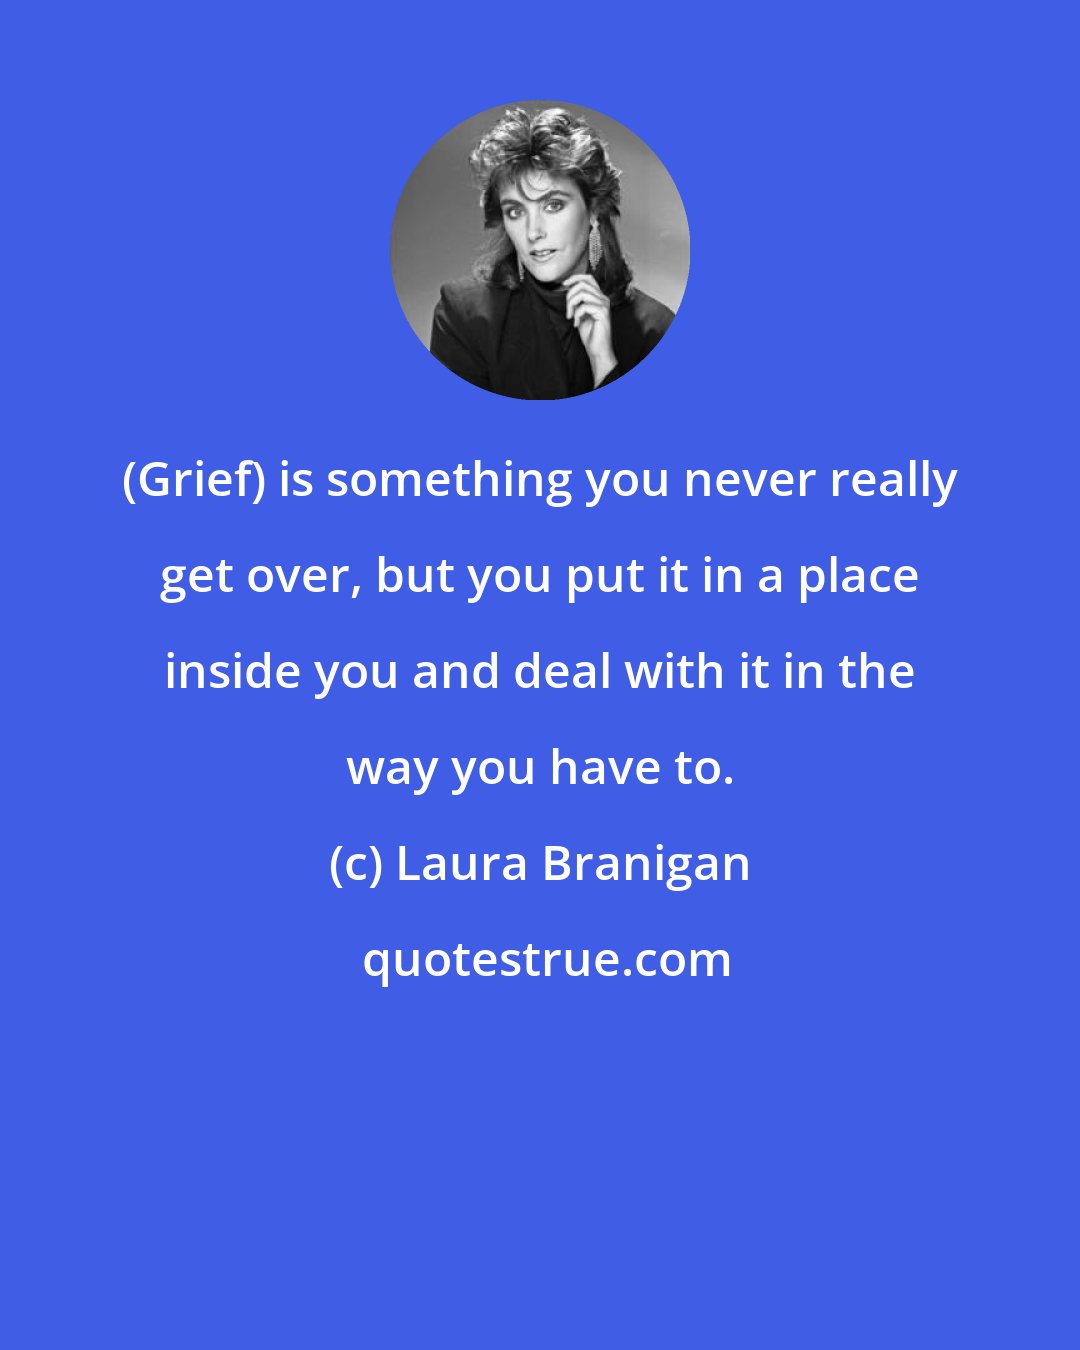 Laura Branigan: (Grief) is something you never really get over, but you put it in a place inside you and deal with it in the way you have to.